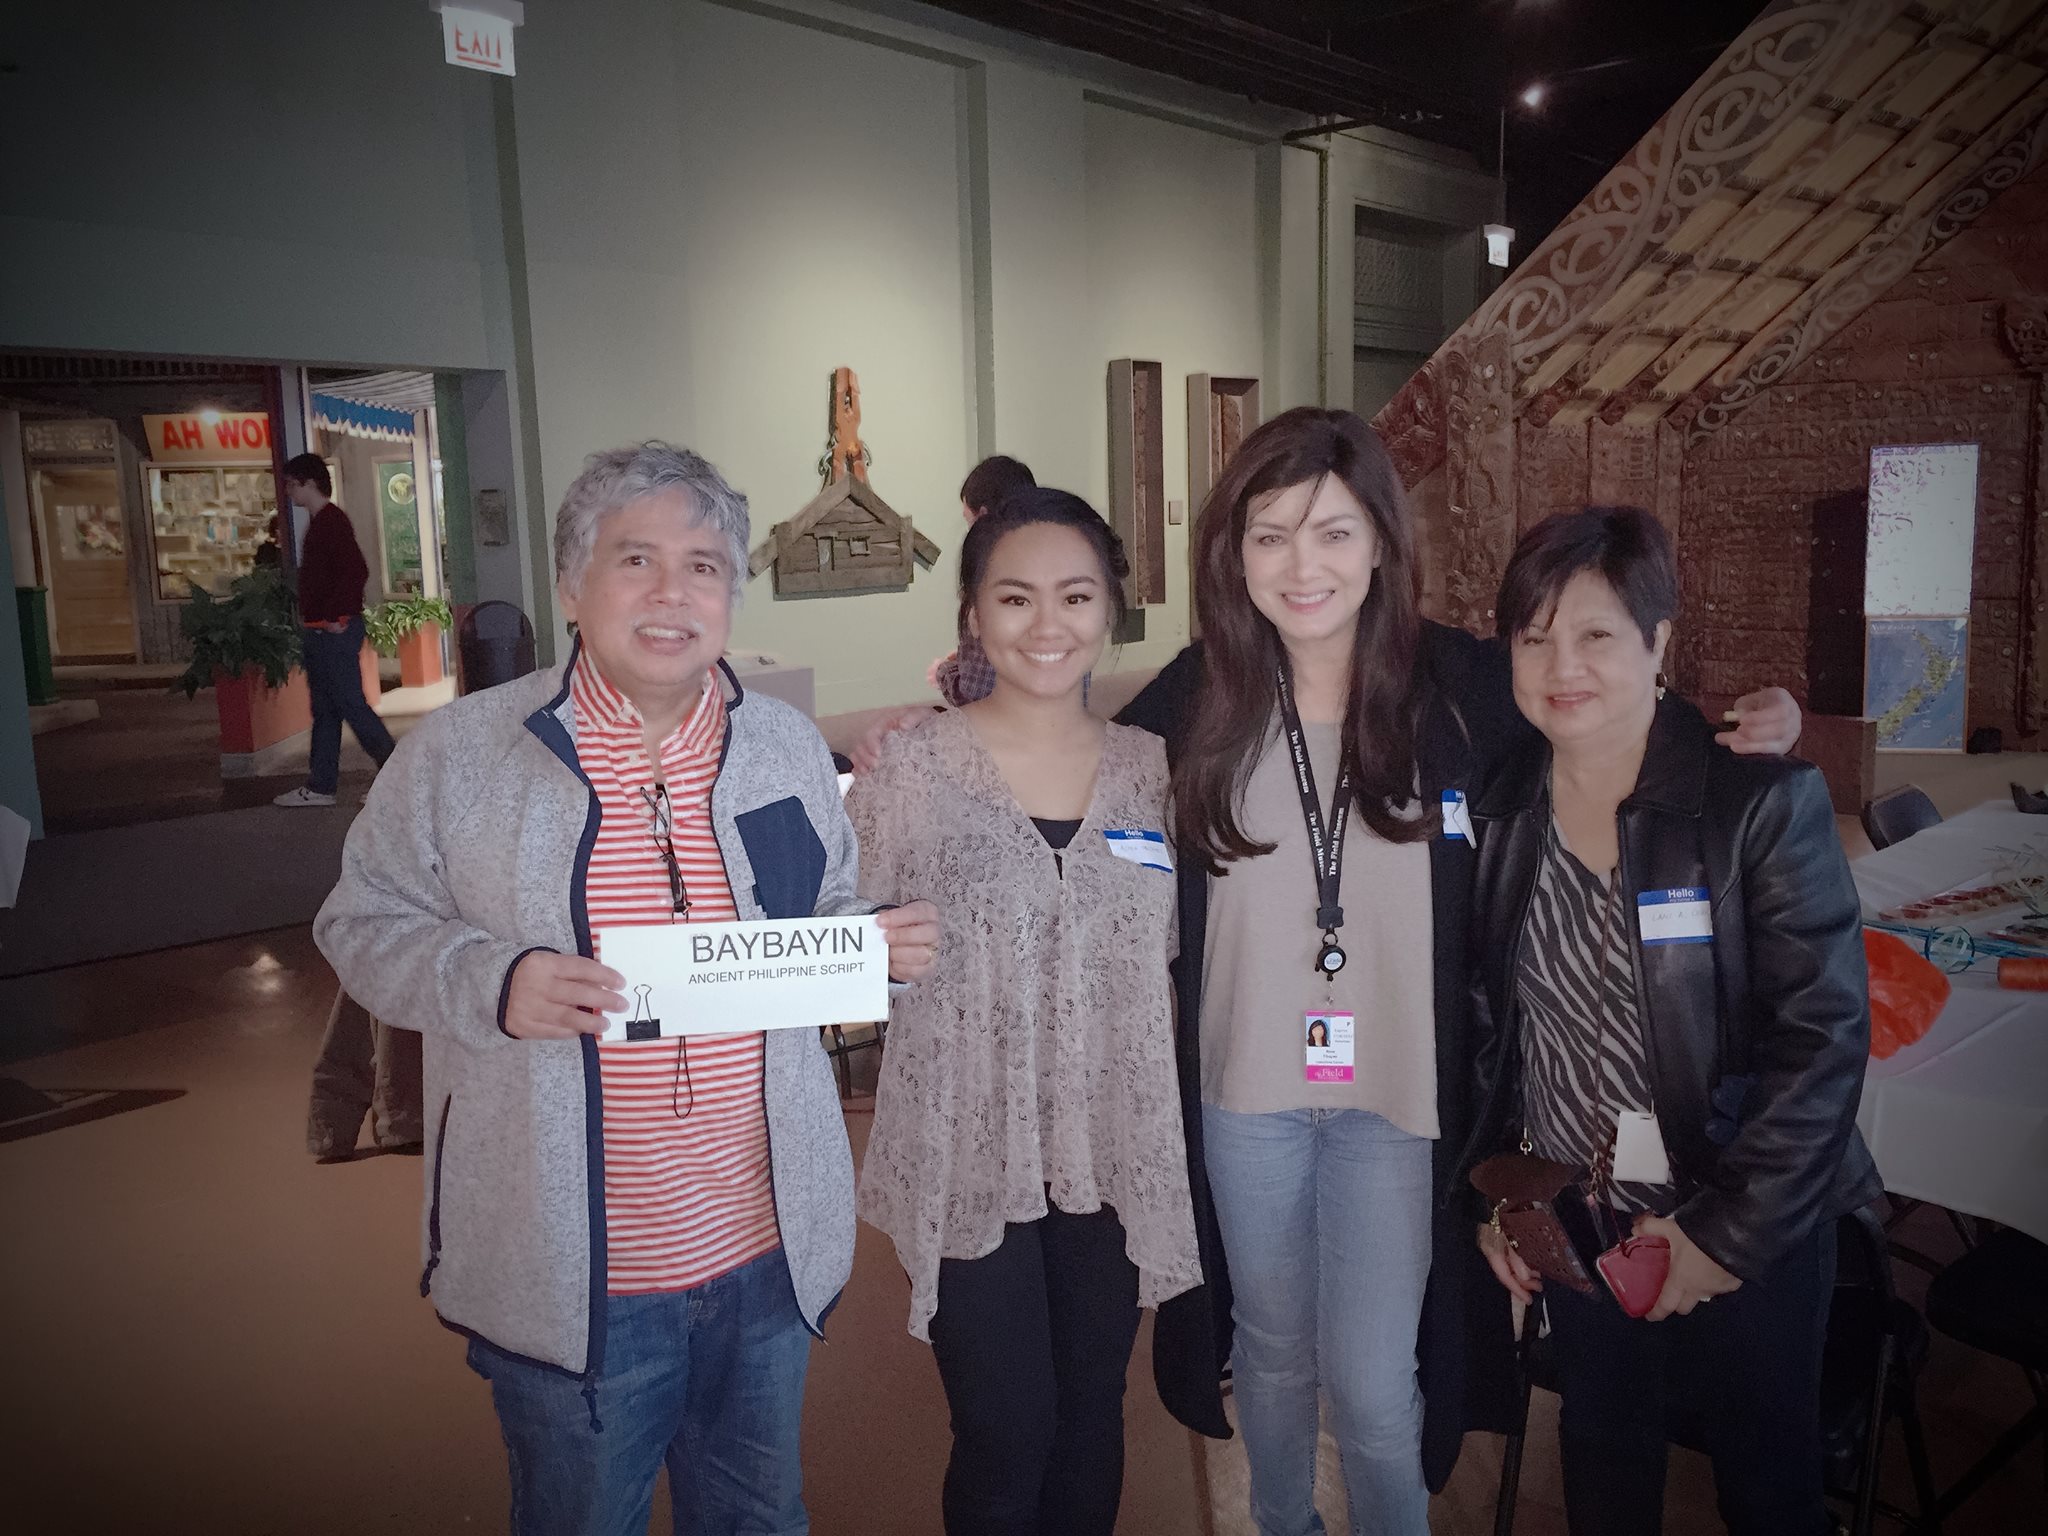 Volunteers posing with a guest. (c) Field Museum of Natural History - CC BY-NC 4.0